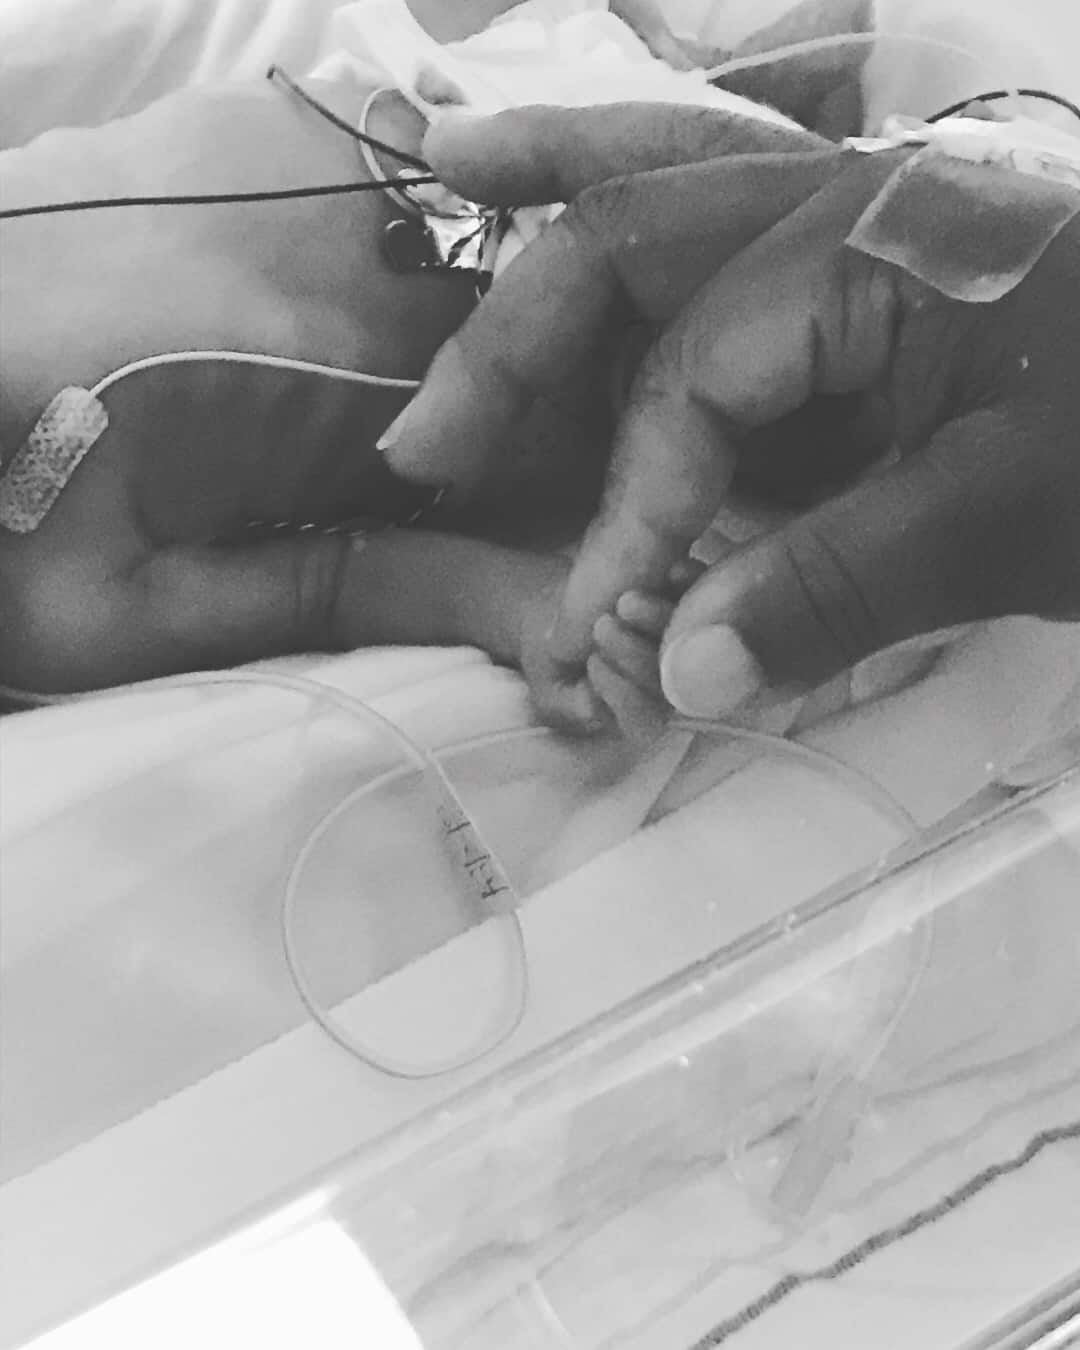 tiny nicu baby hand-holding moms larger hand